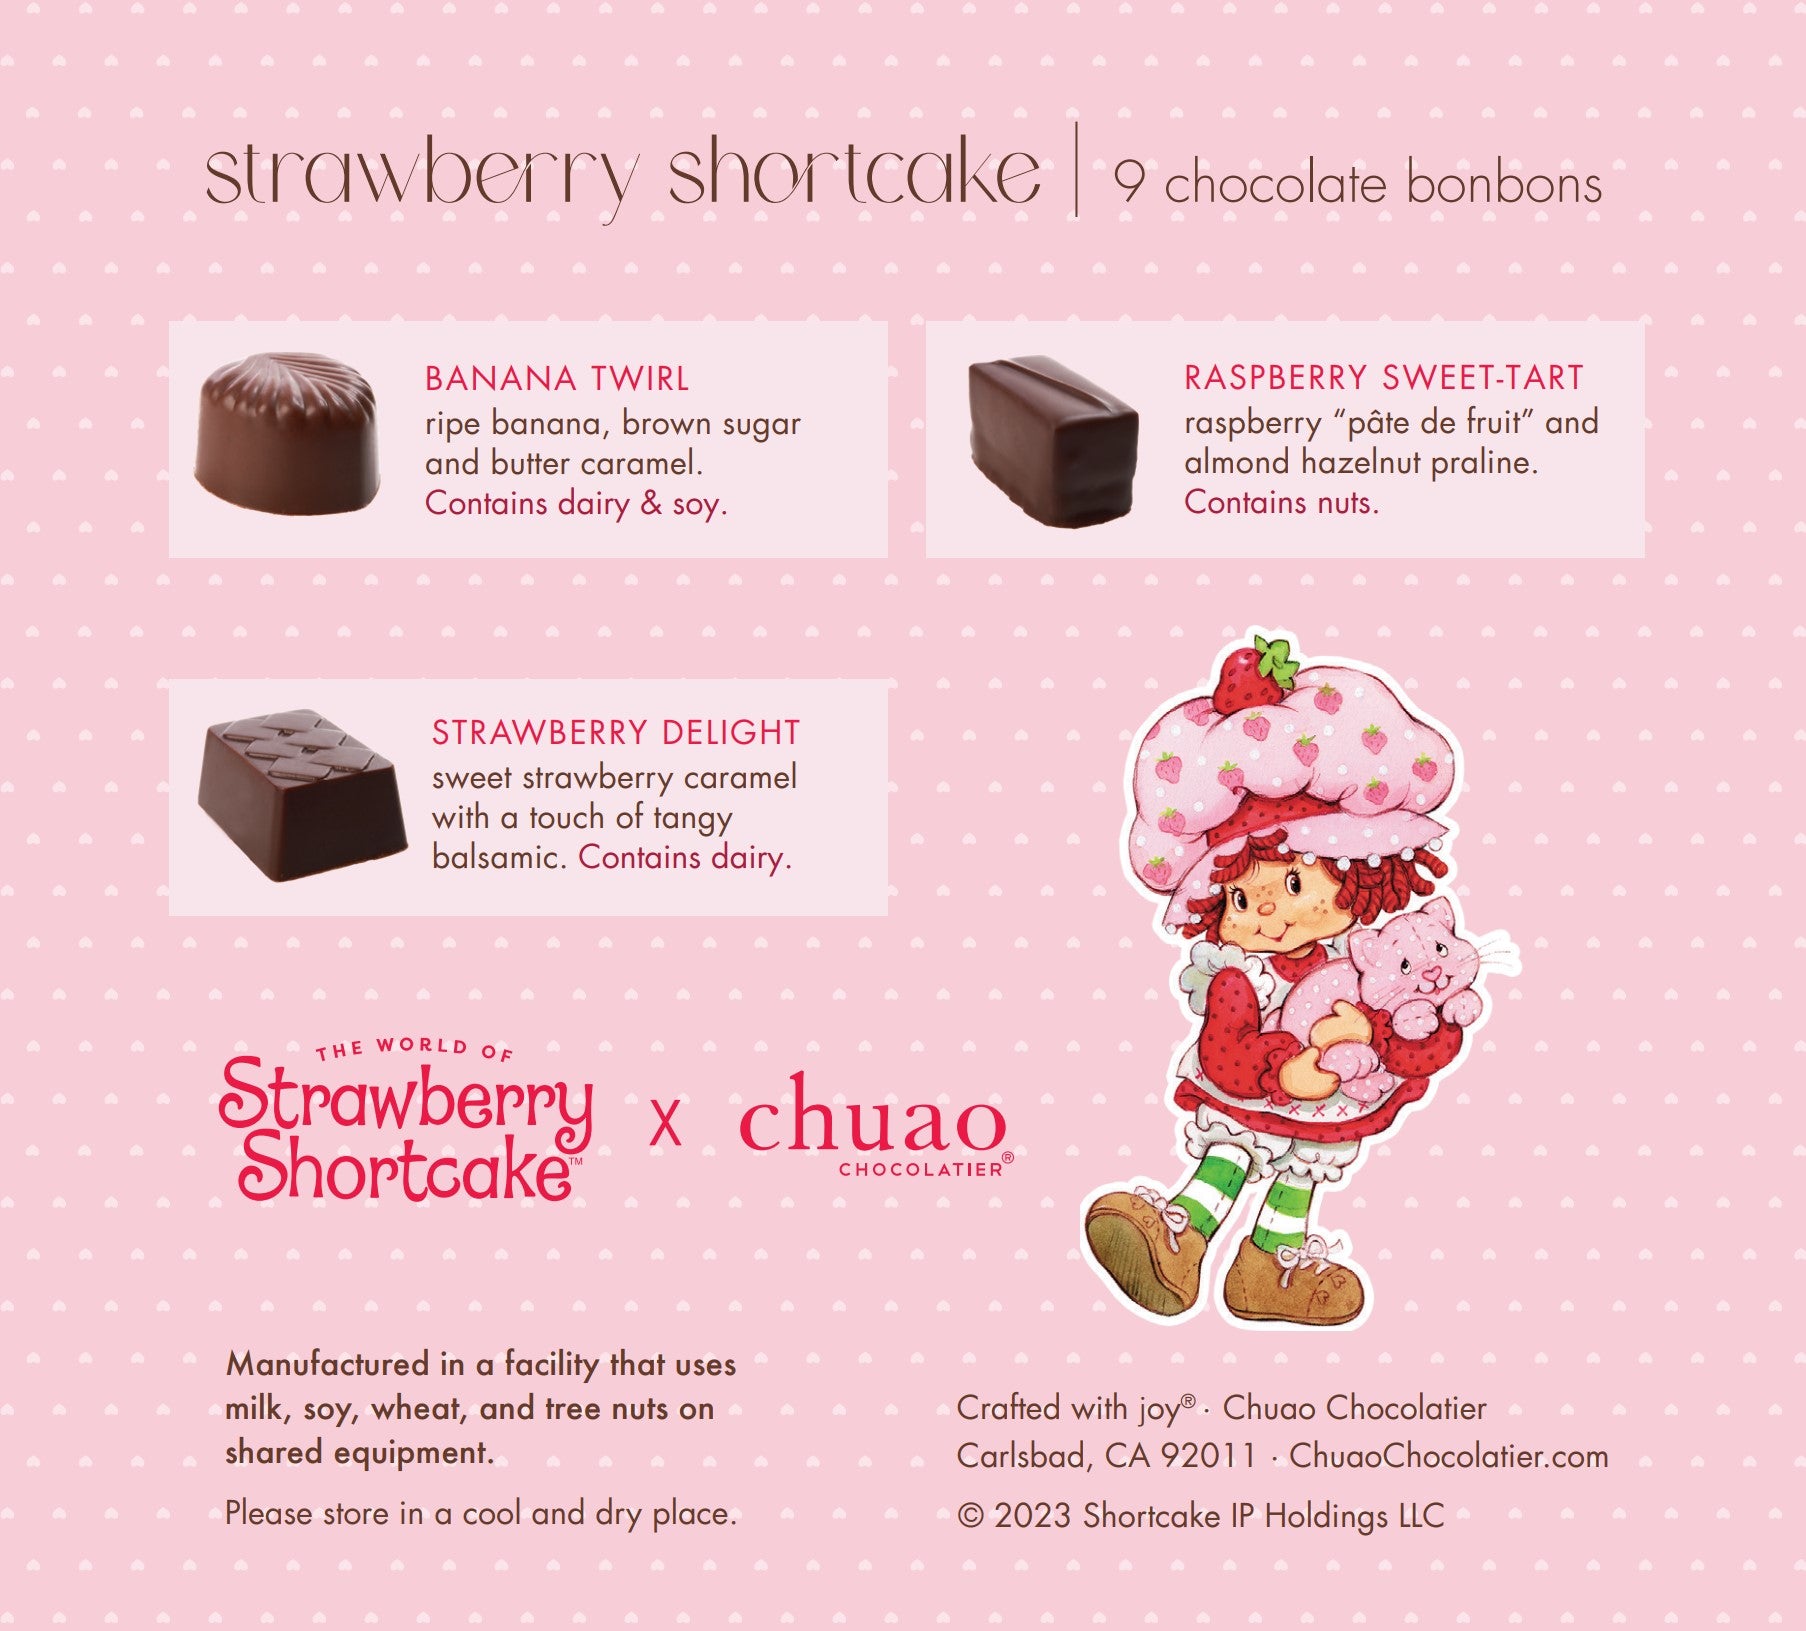 detailed images and descriptions of each chuao bonbon chocolate featuring strawberry shortcake and a pink background